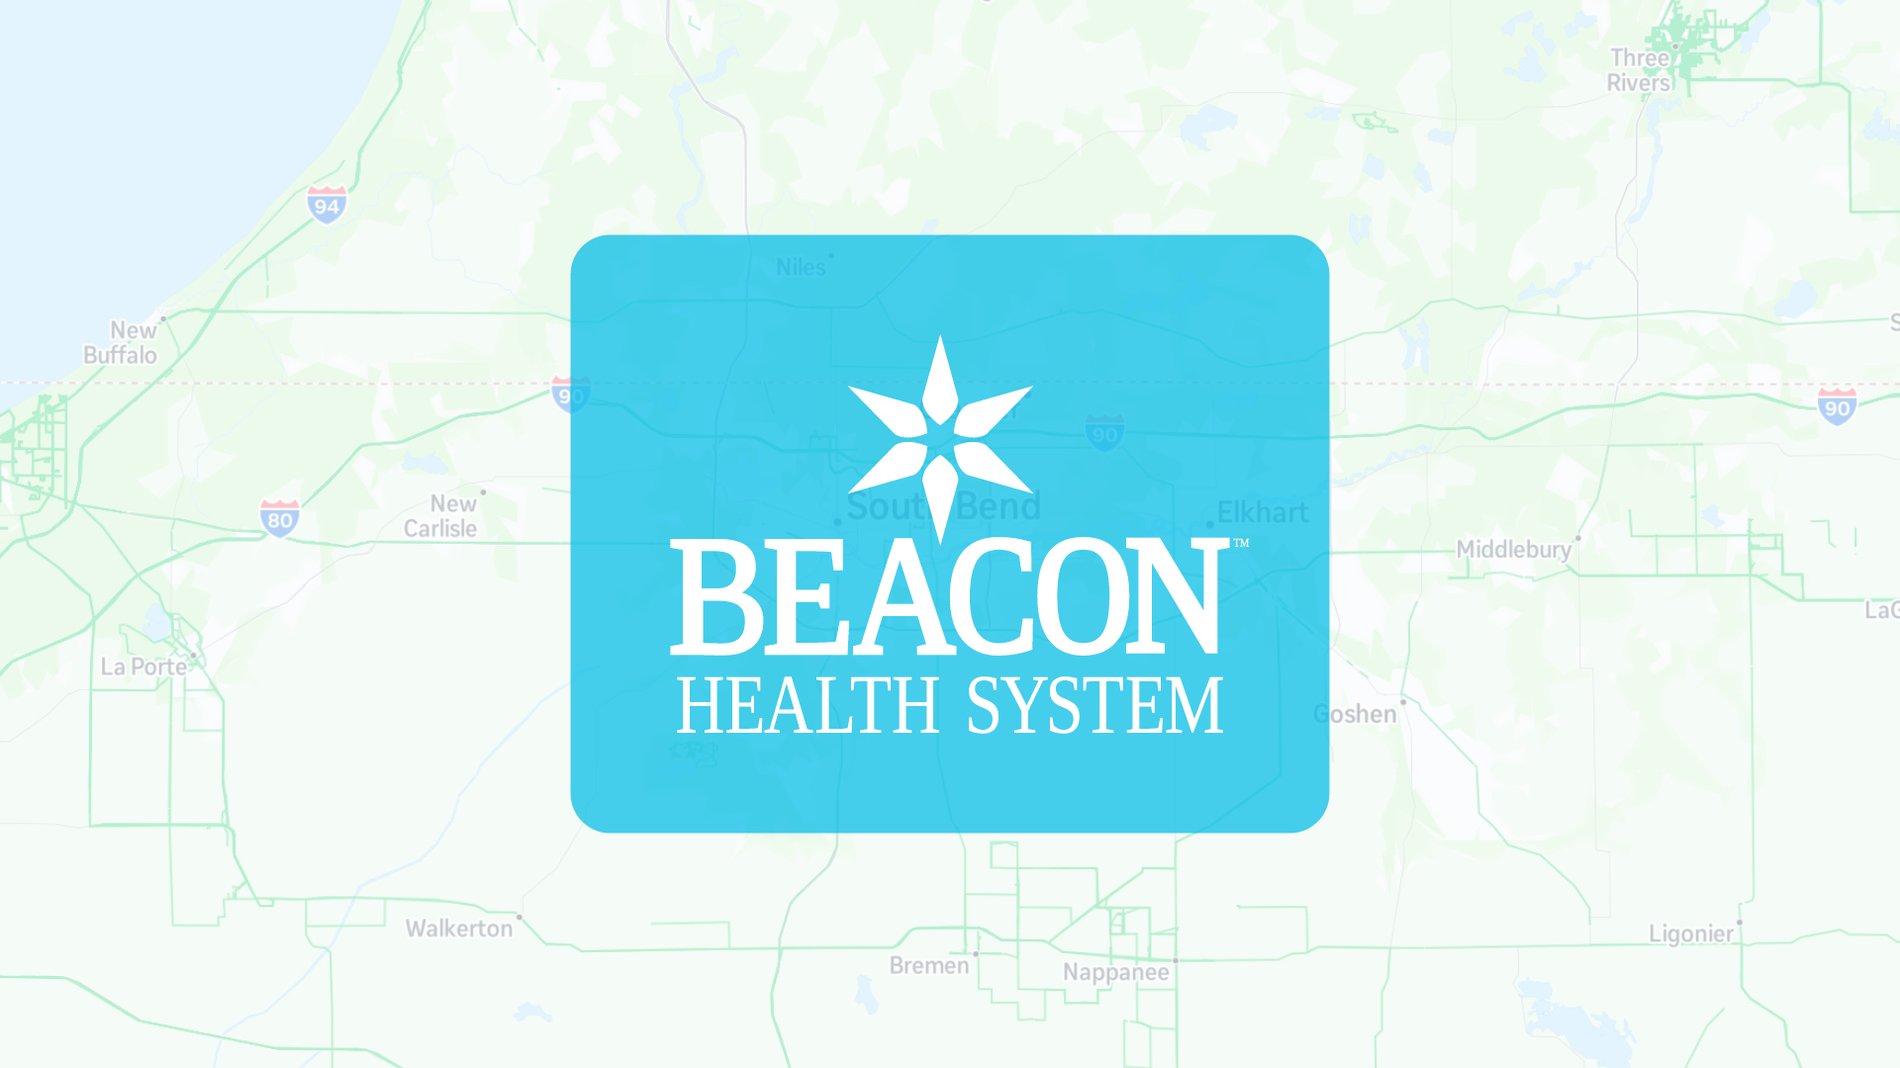 Beacon Health System white logo on teal background with star icon placed over a map of South Bend Indiana.